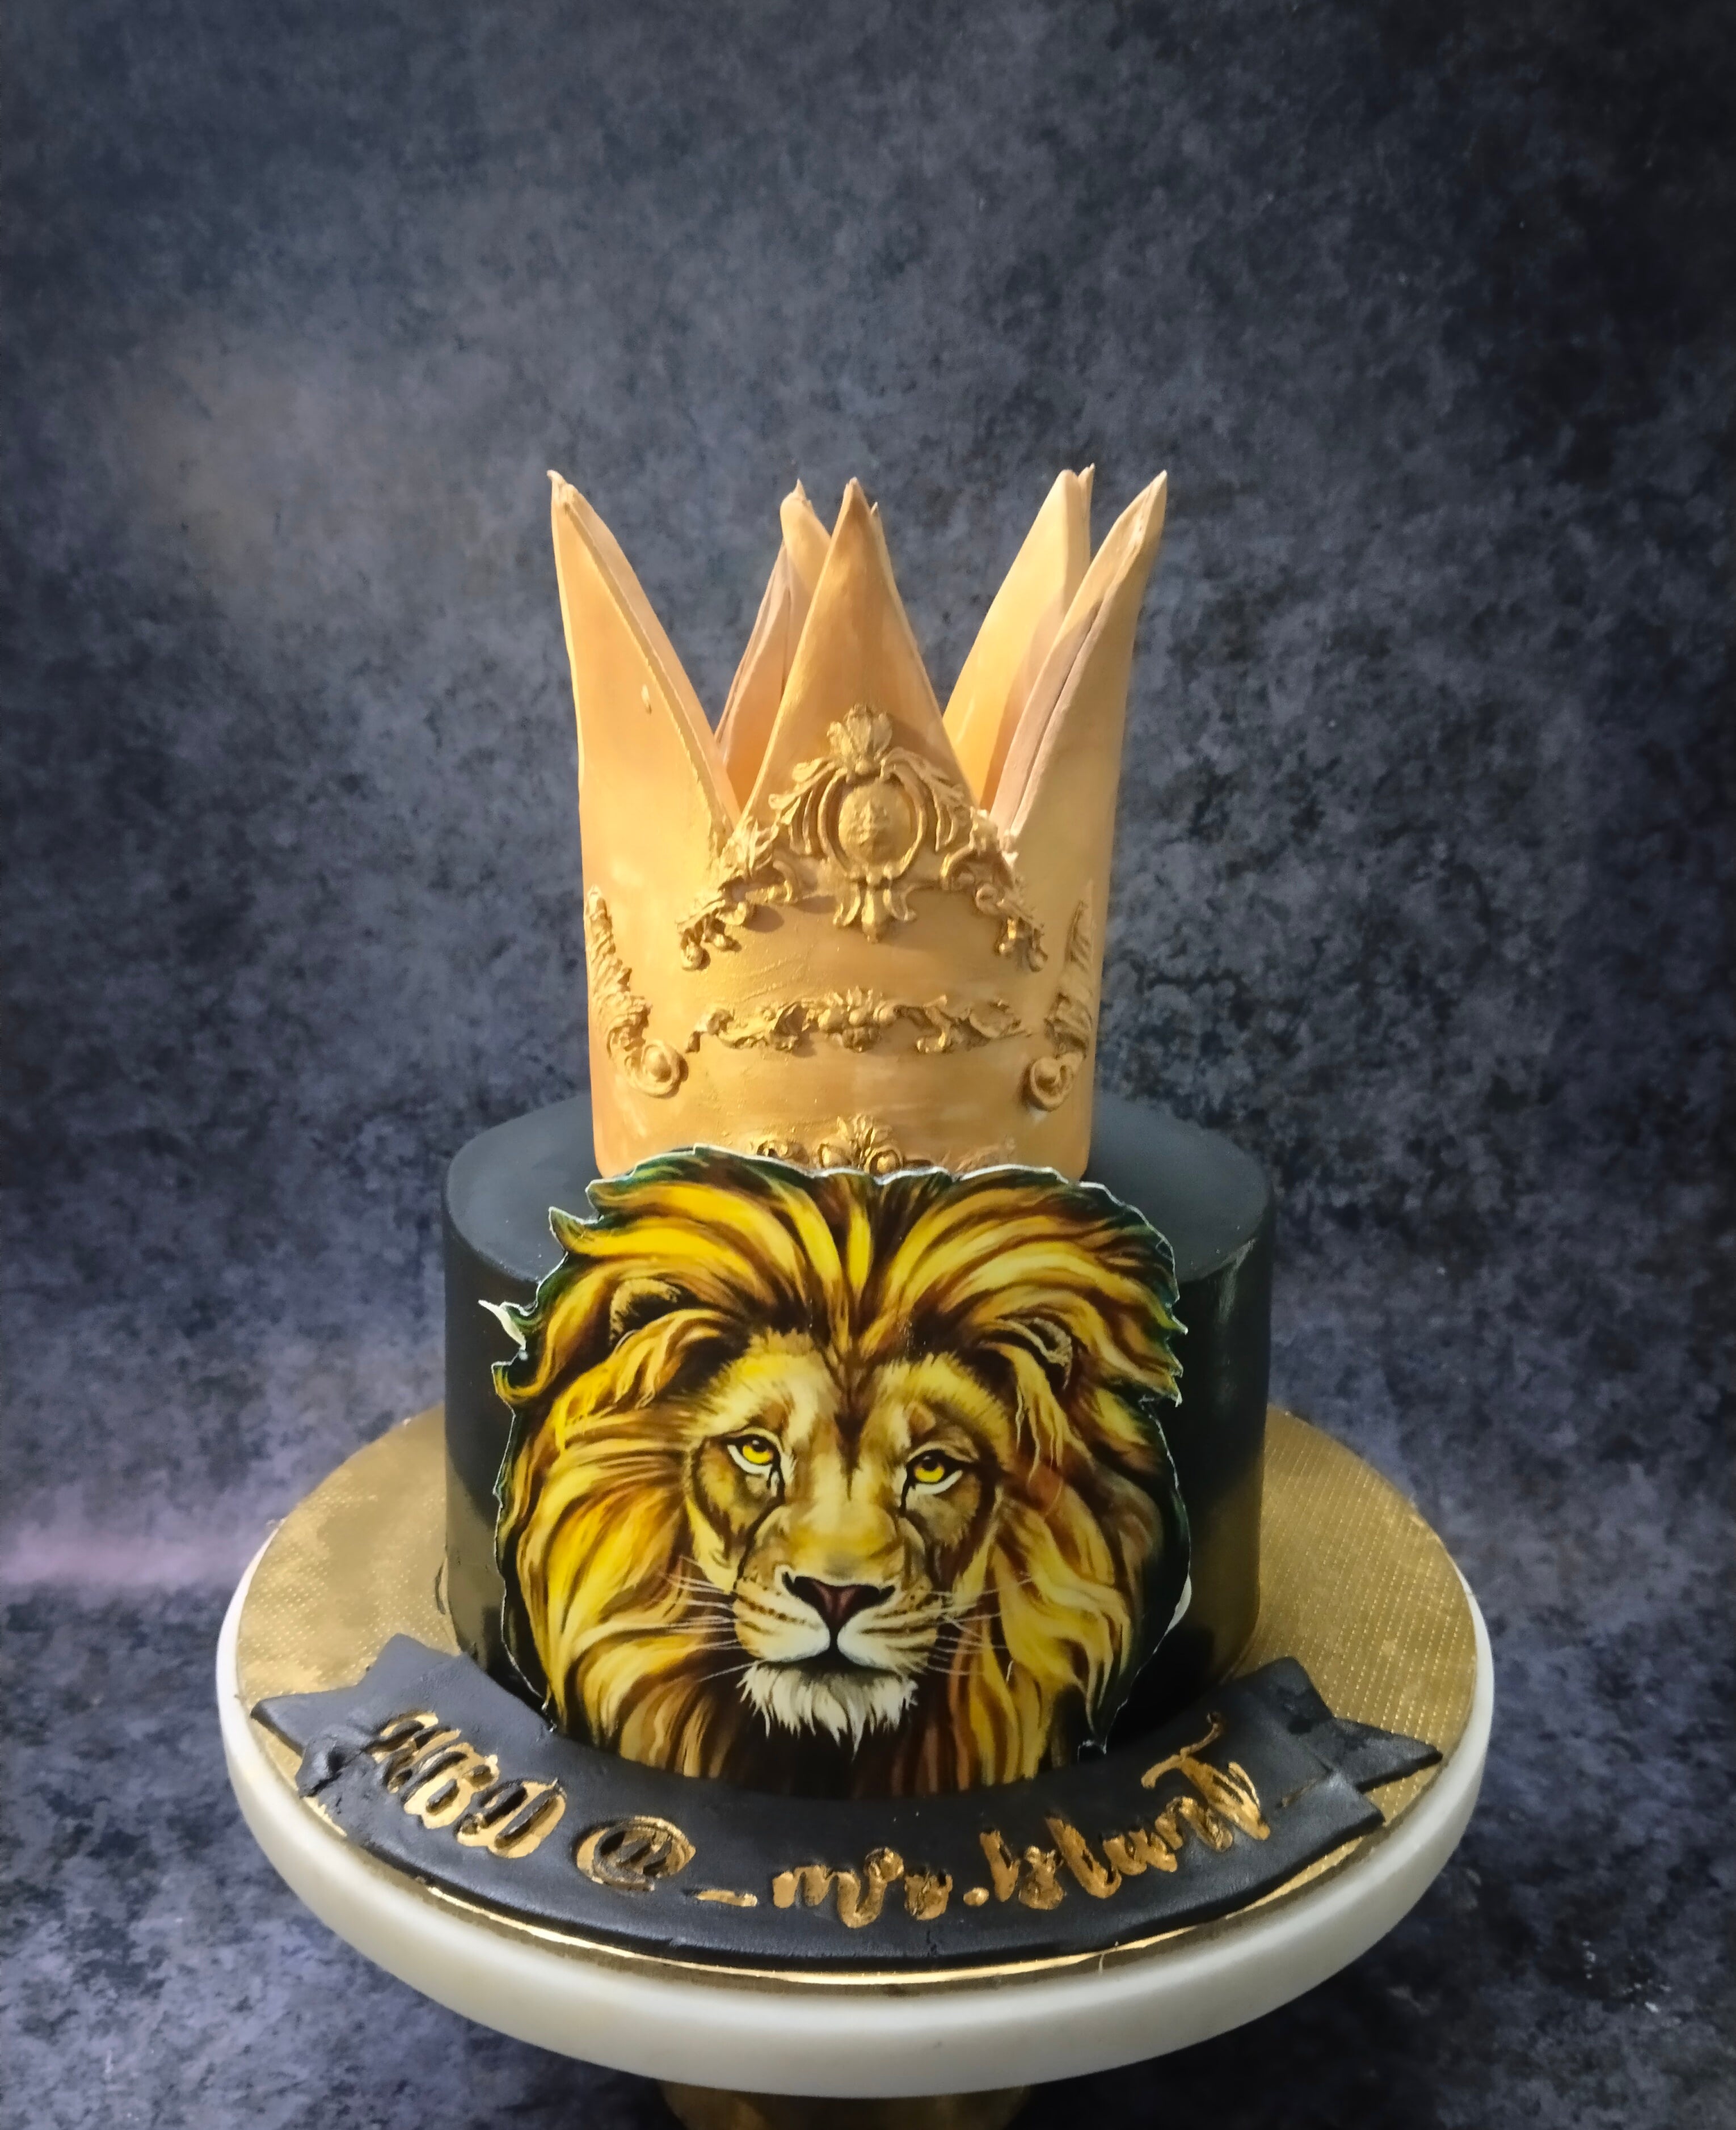 Sweet AF Cakes - A “lion king” first birthday cake. #lionking  #firstbirthdaycake #fondantlion #fondantballoon #cakesofinstagram  #cakedecorating #croftonmd | Facebook